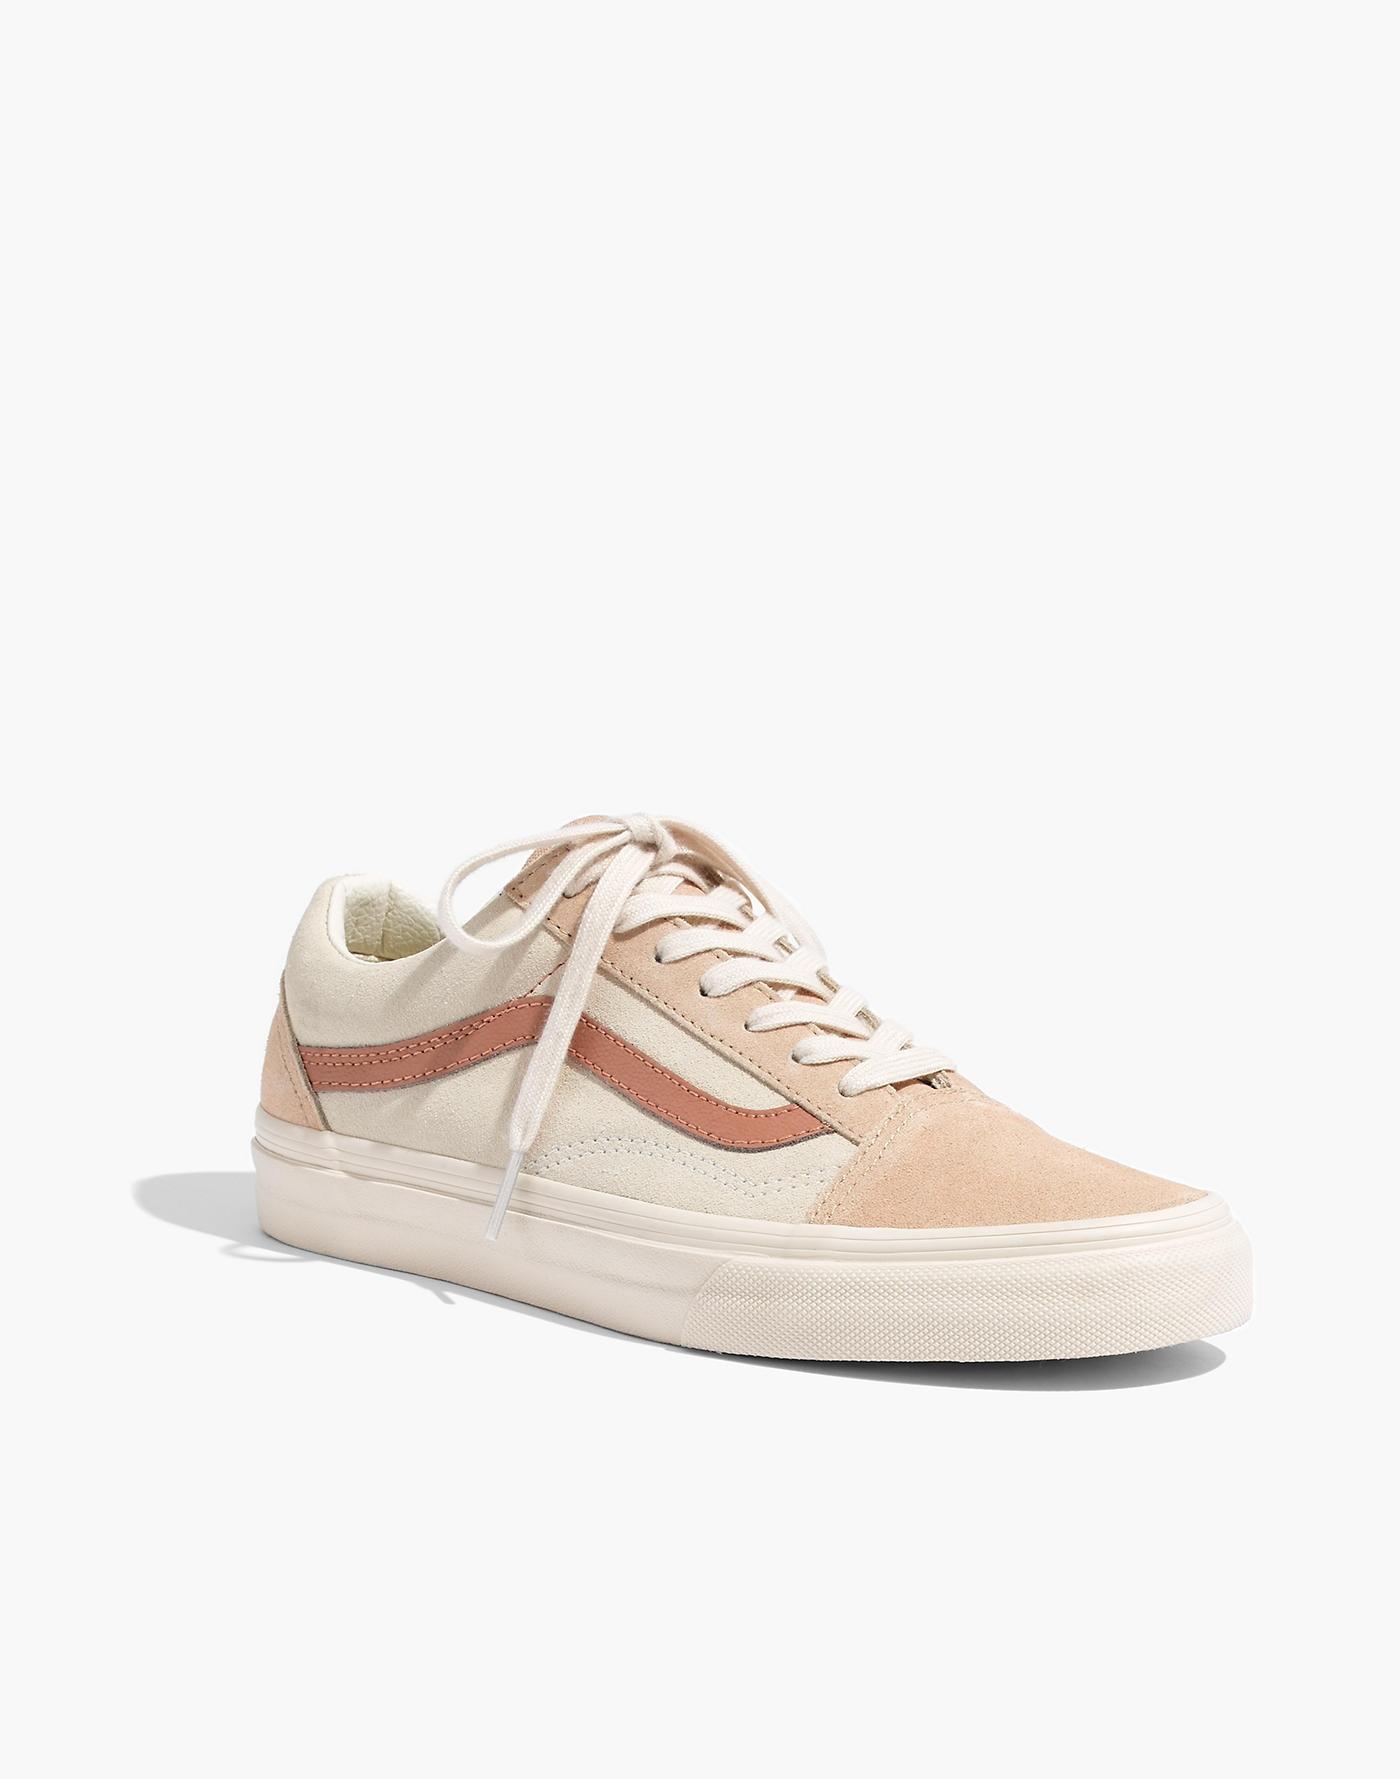 Madewell X Vans Unisex Old Skool Lace-up Sneakers In Colorblock in Natural - Lyst